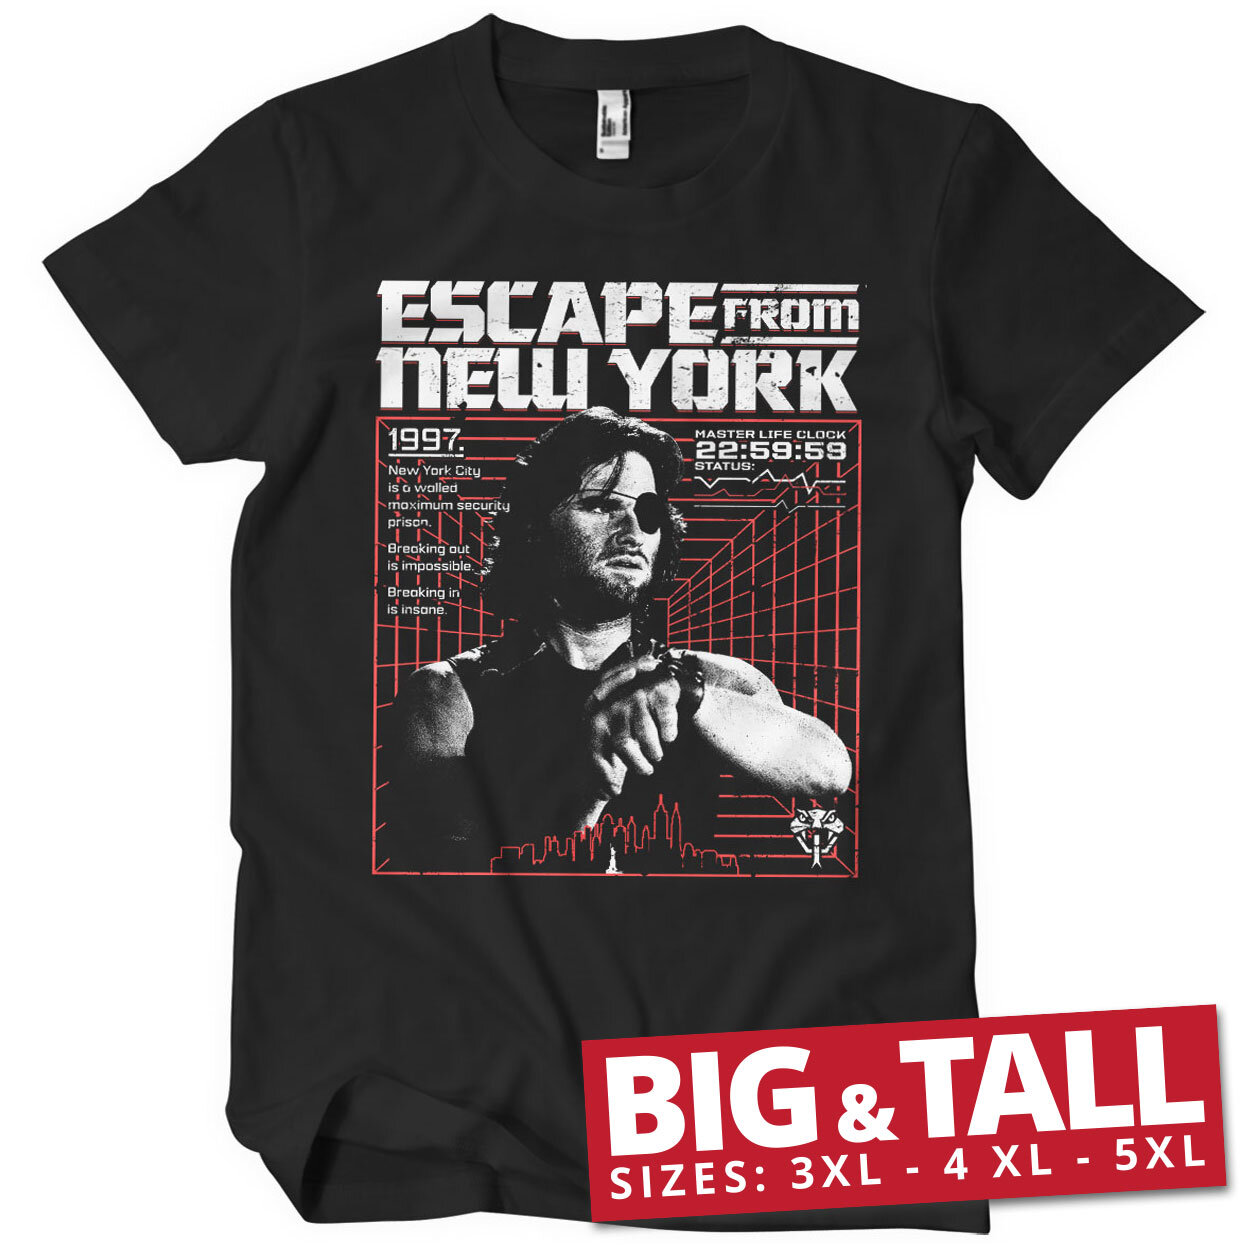 Escape From N.Y. 1997 Big & Tall T-Shirt